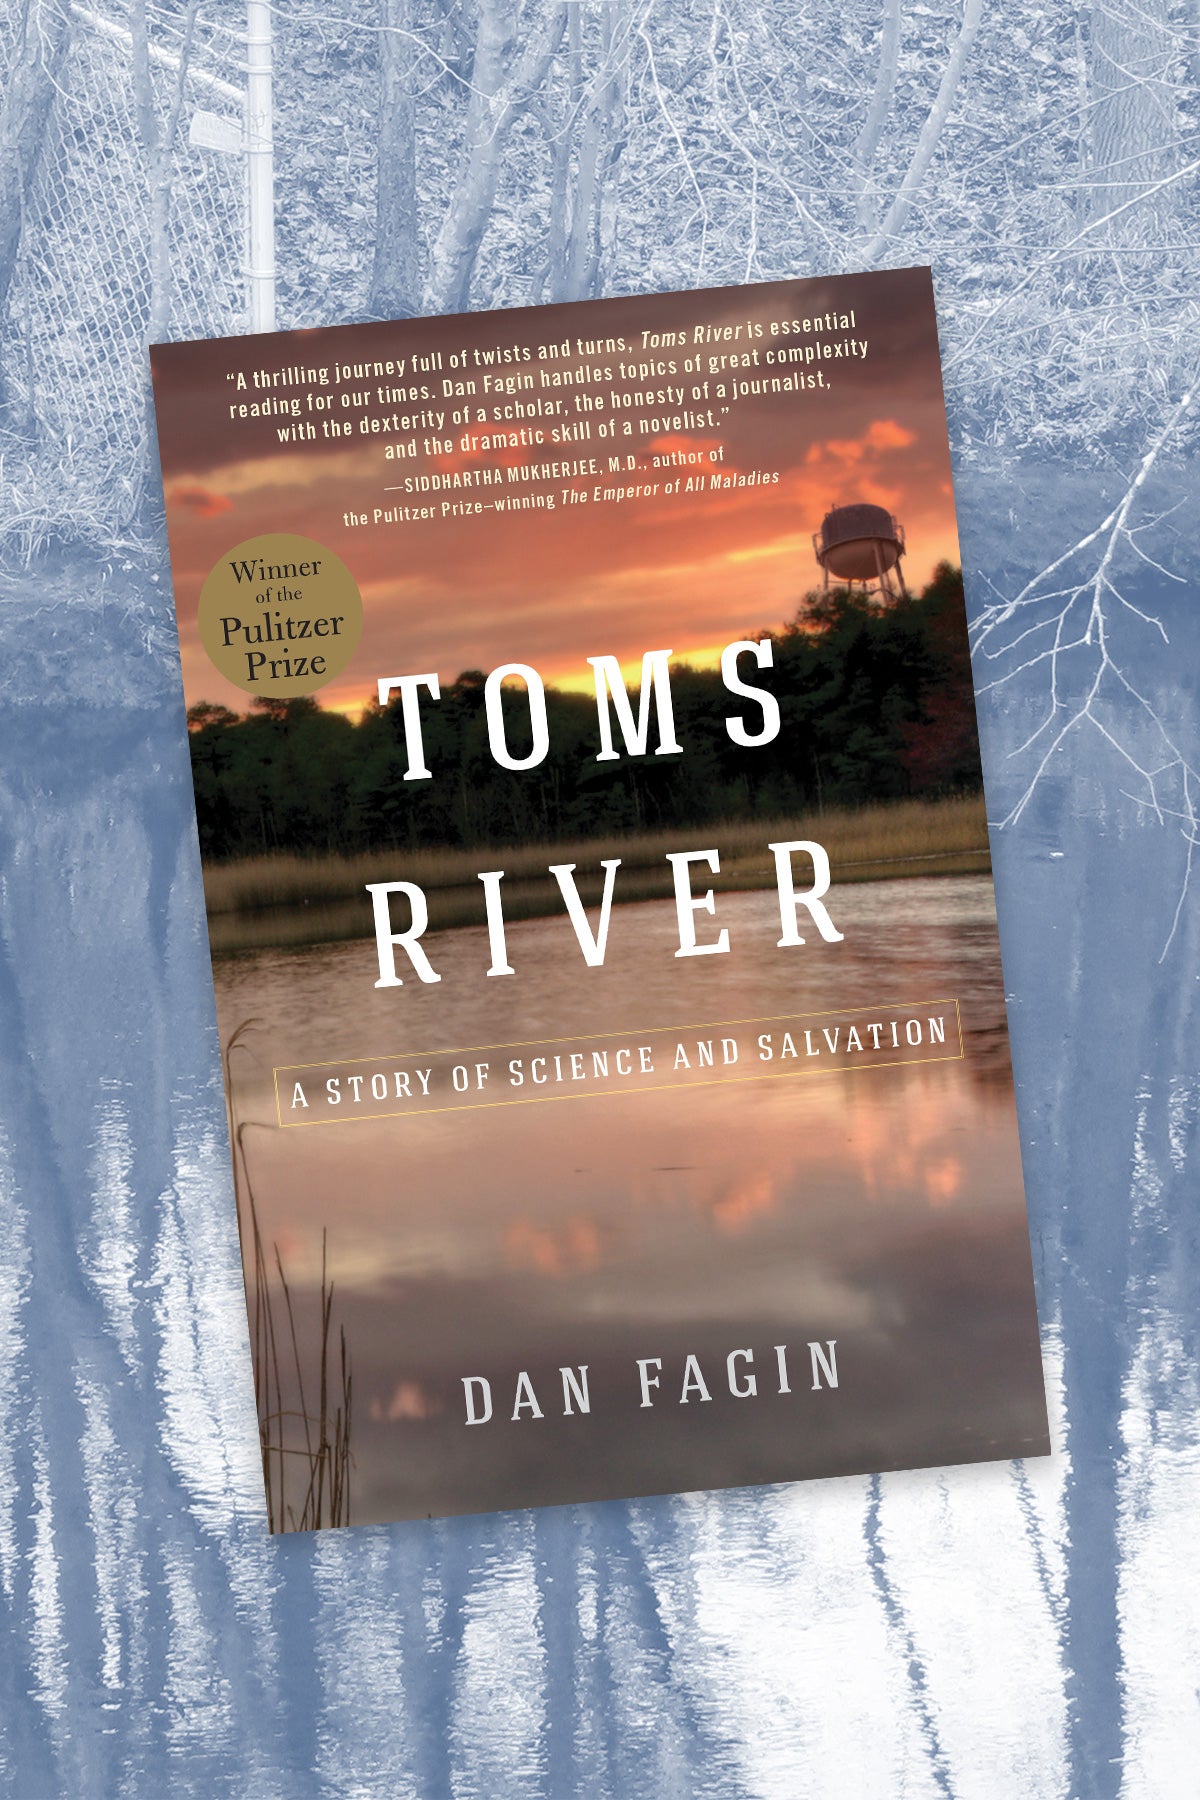 Book cover for “Toms River: A Story of Science and Salvation” on a photo of Toms River, NJ. The background image is black and white with a light blue tint.